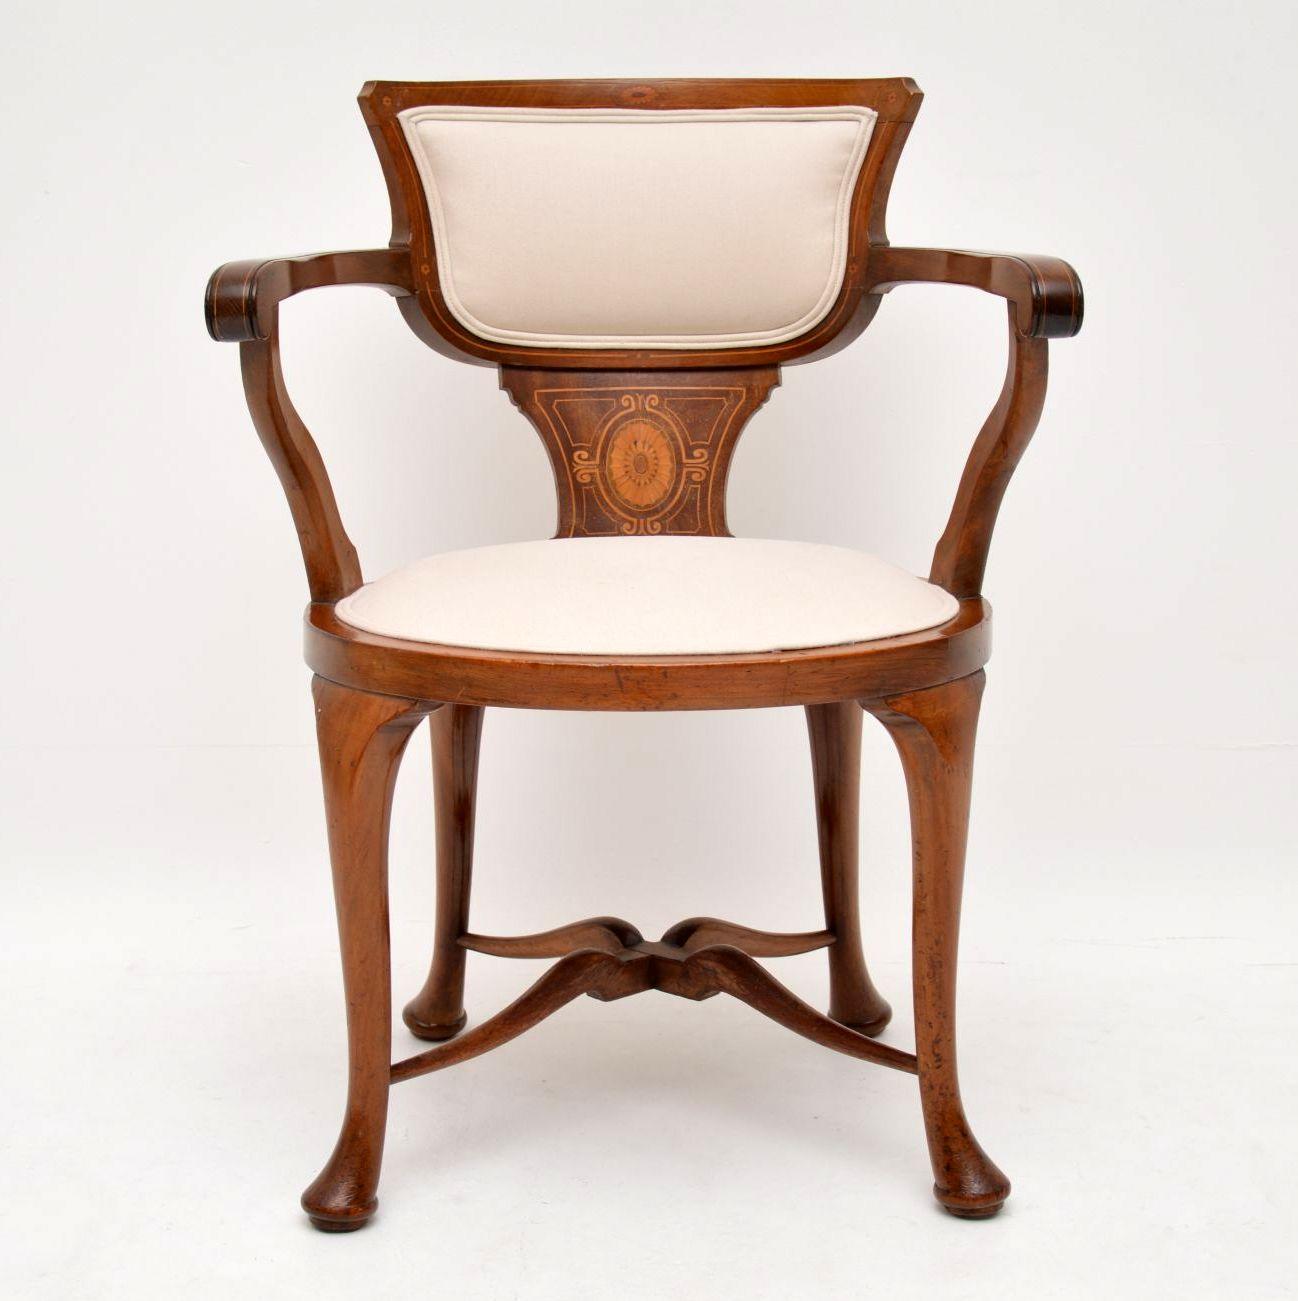 I believe this antique armchair would be a perfect candidate for a desk chair, because the arms are set back a bit from the seat front. This chair is solid mahogany, with exquisite satinwood & other inlays inside the back & on the arms. It’s